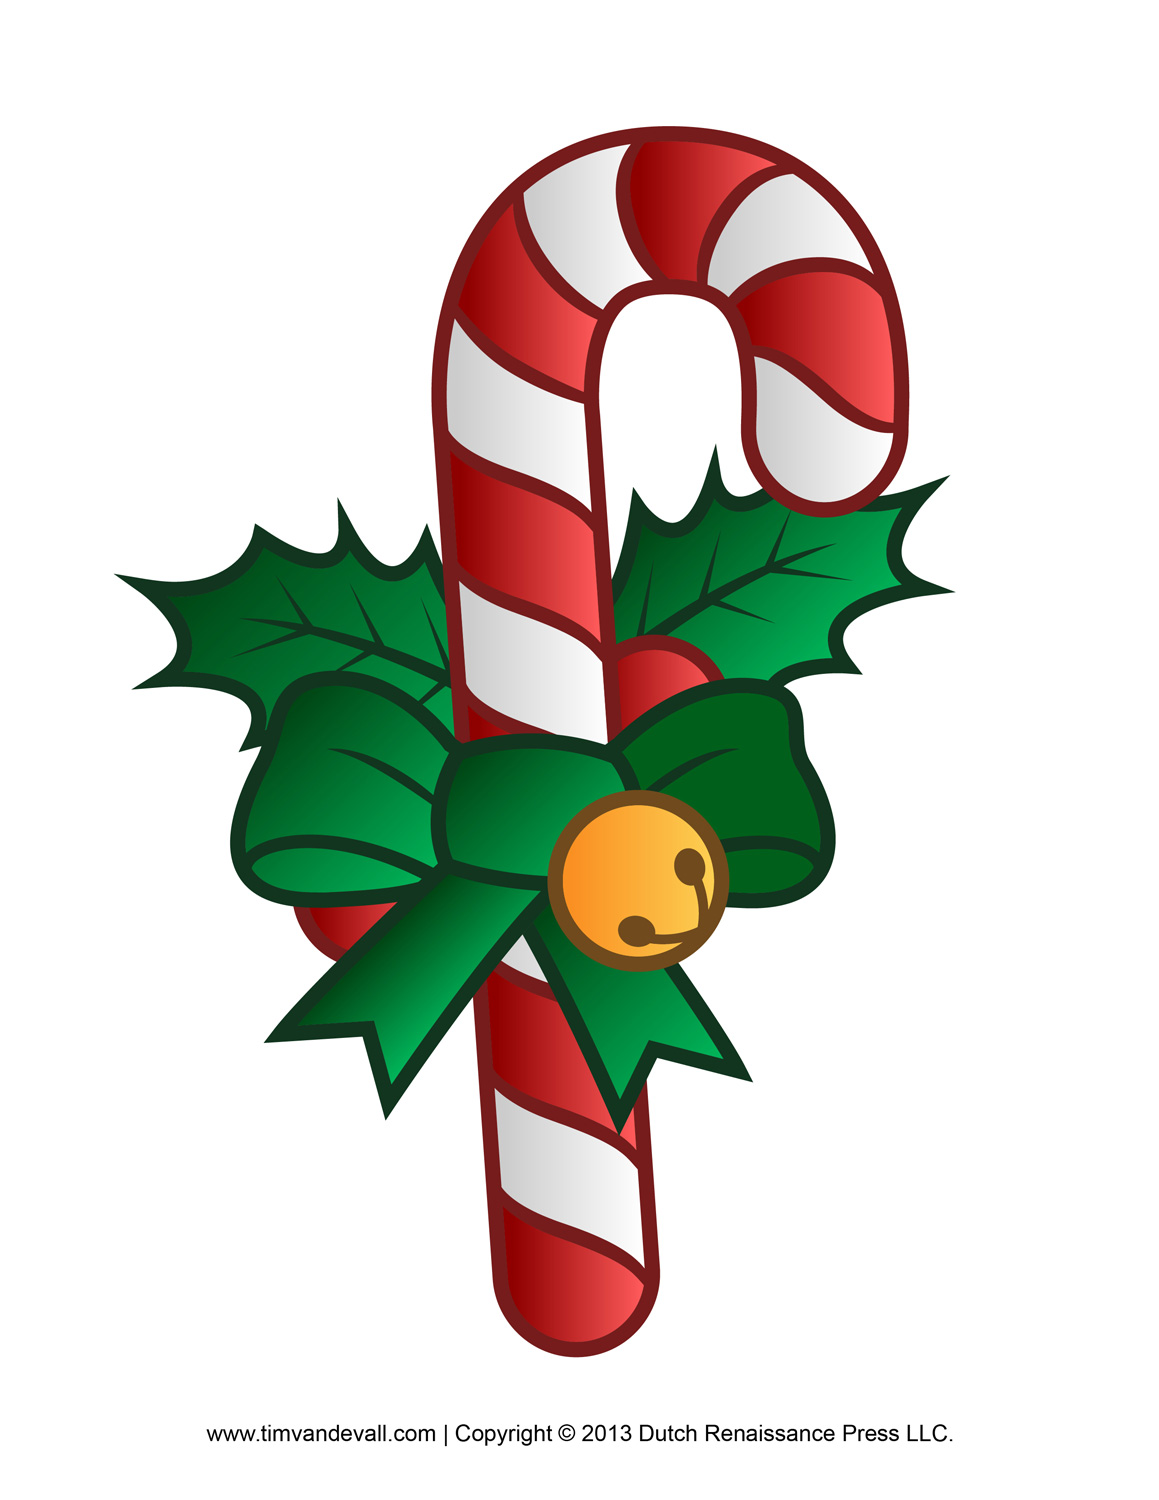 Candy cane free clipart - Free Candy Cane Clipart